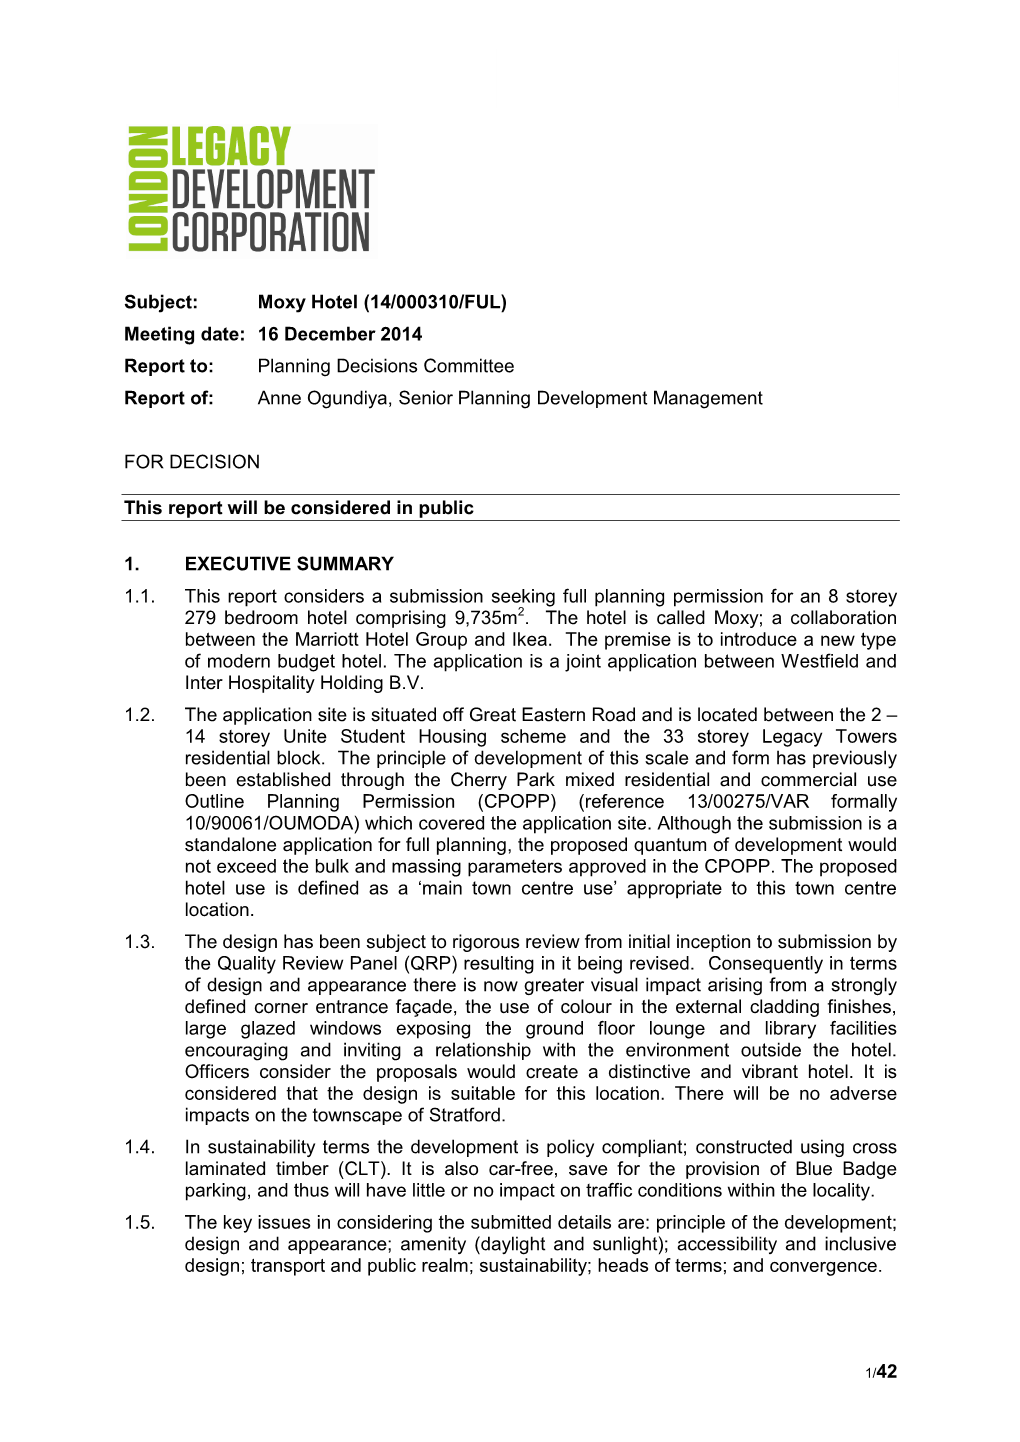 Moxy Hotel (14/000310/FUL) Meeting Date: 16 December 2014 Report To: Planning Decisions Committee Report Of: Anne Ogundiya, Senior Planning Development Management